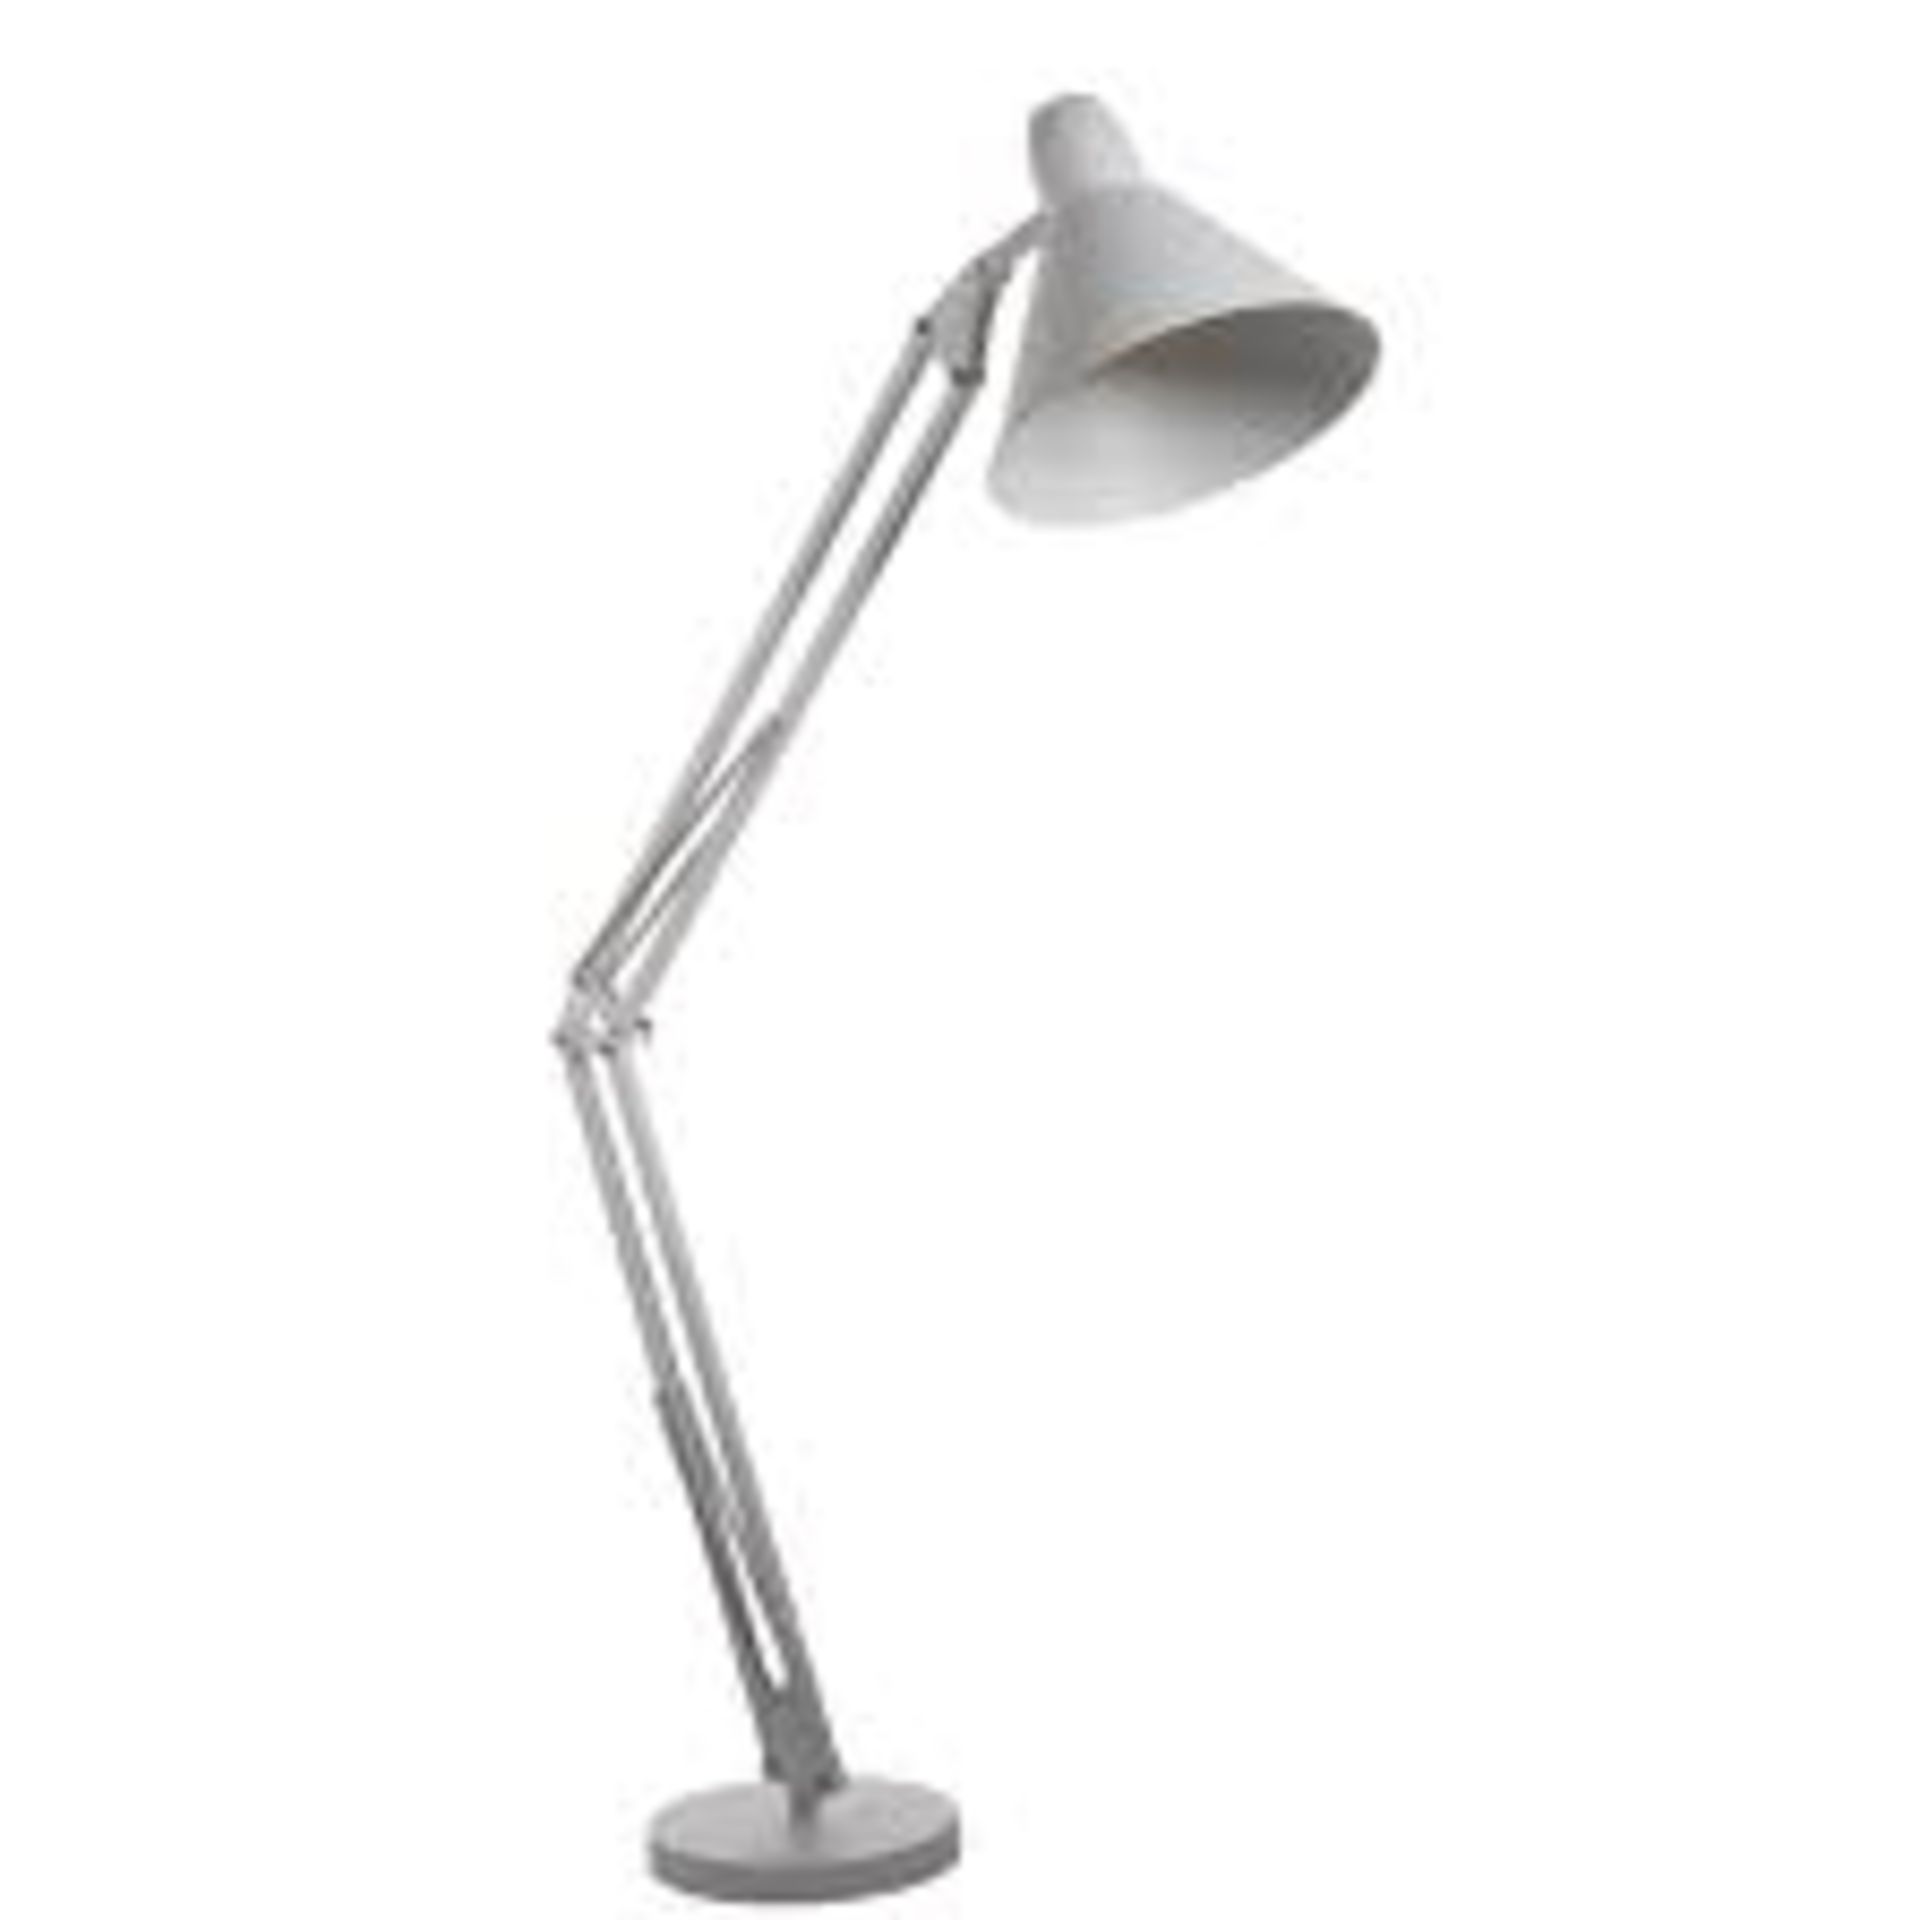 1 x Searchlight Hobby Floor Lamp in matt white - Ref: 7073WH - New and Boxed - RRP: £180 - Image 3 of 4